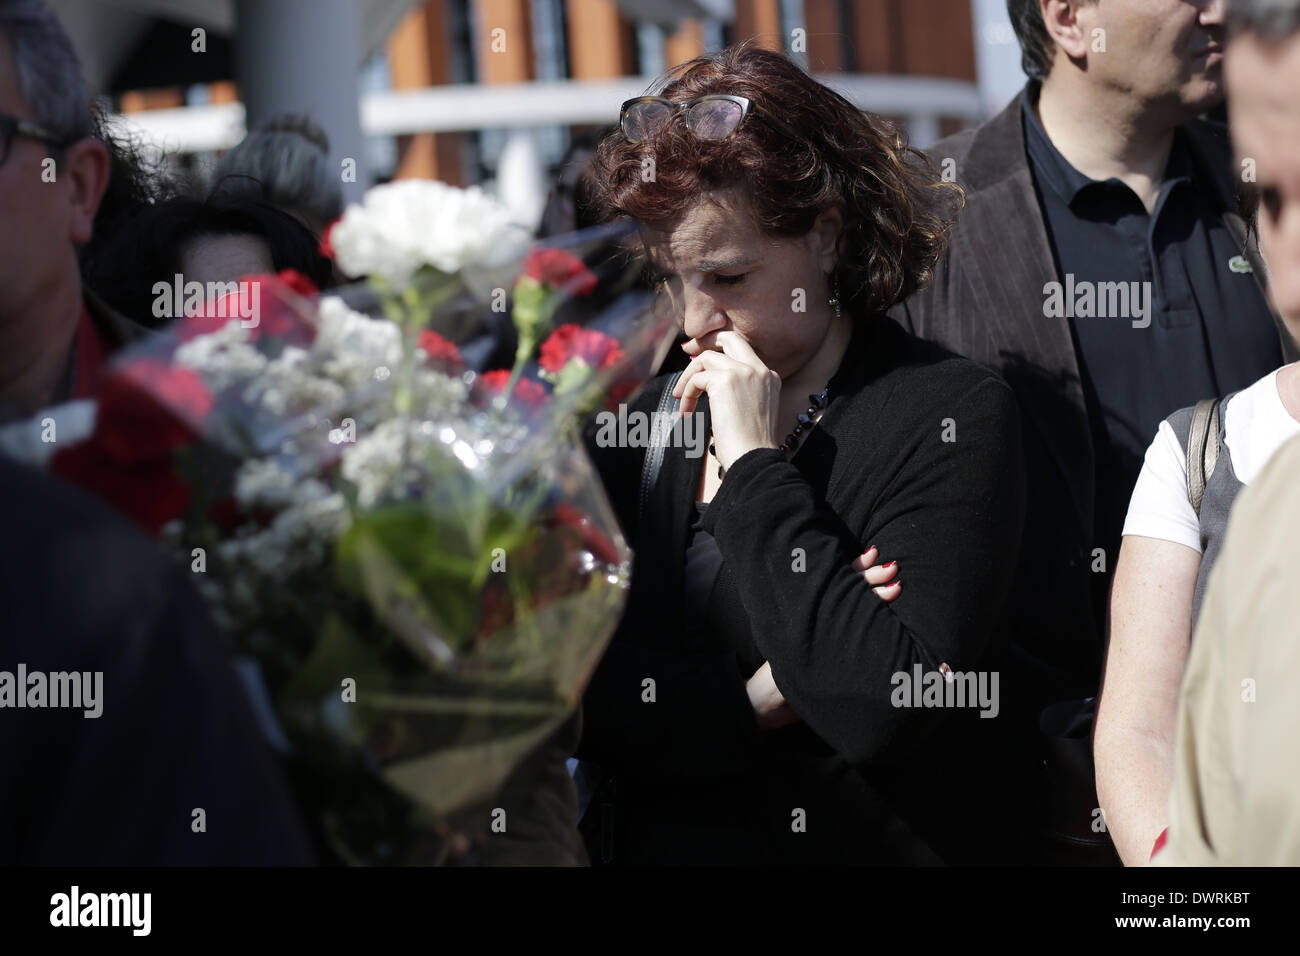 Madrid, Spain. 11th Mar, 2014. A woman gestures during an event outside Atocha's train station in remember of the people killed in the Madrid train bombings in Madrid, Spain, Tuesday March 11, 2014, in remembrance of those killed and injured in the Madrid train bombings, marking the 10th anniversary of Europe's worst Islamic terror attack. The attackers targeted four commuter trains with 10 shrapnel-filled bombs concealed in backpacks during morning rush hour on March 11, 2004. Credit:  Rodrigo Garcia/NurPhoto/ZUMAPRESS.com/Alamy Live News Stock Photo